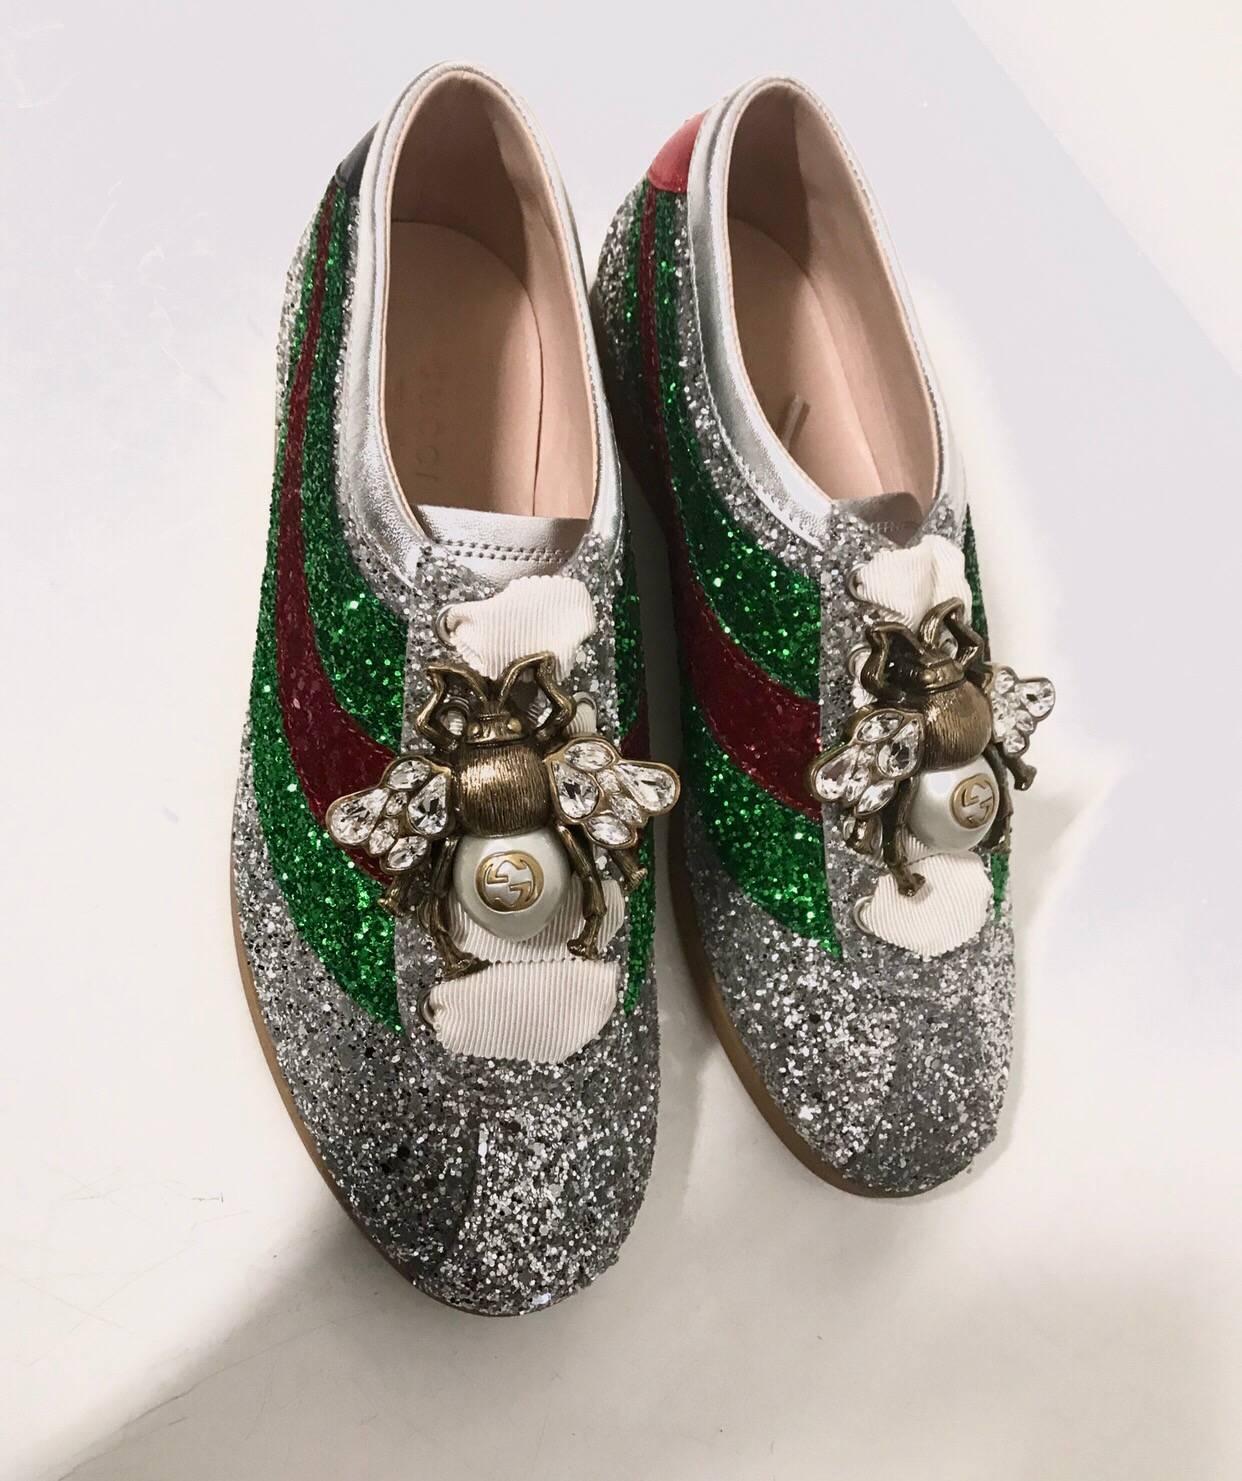 gucci bling sneakers